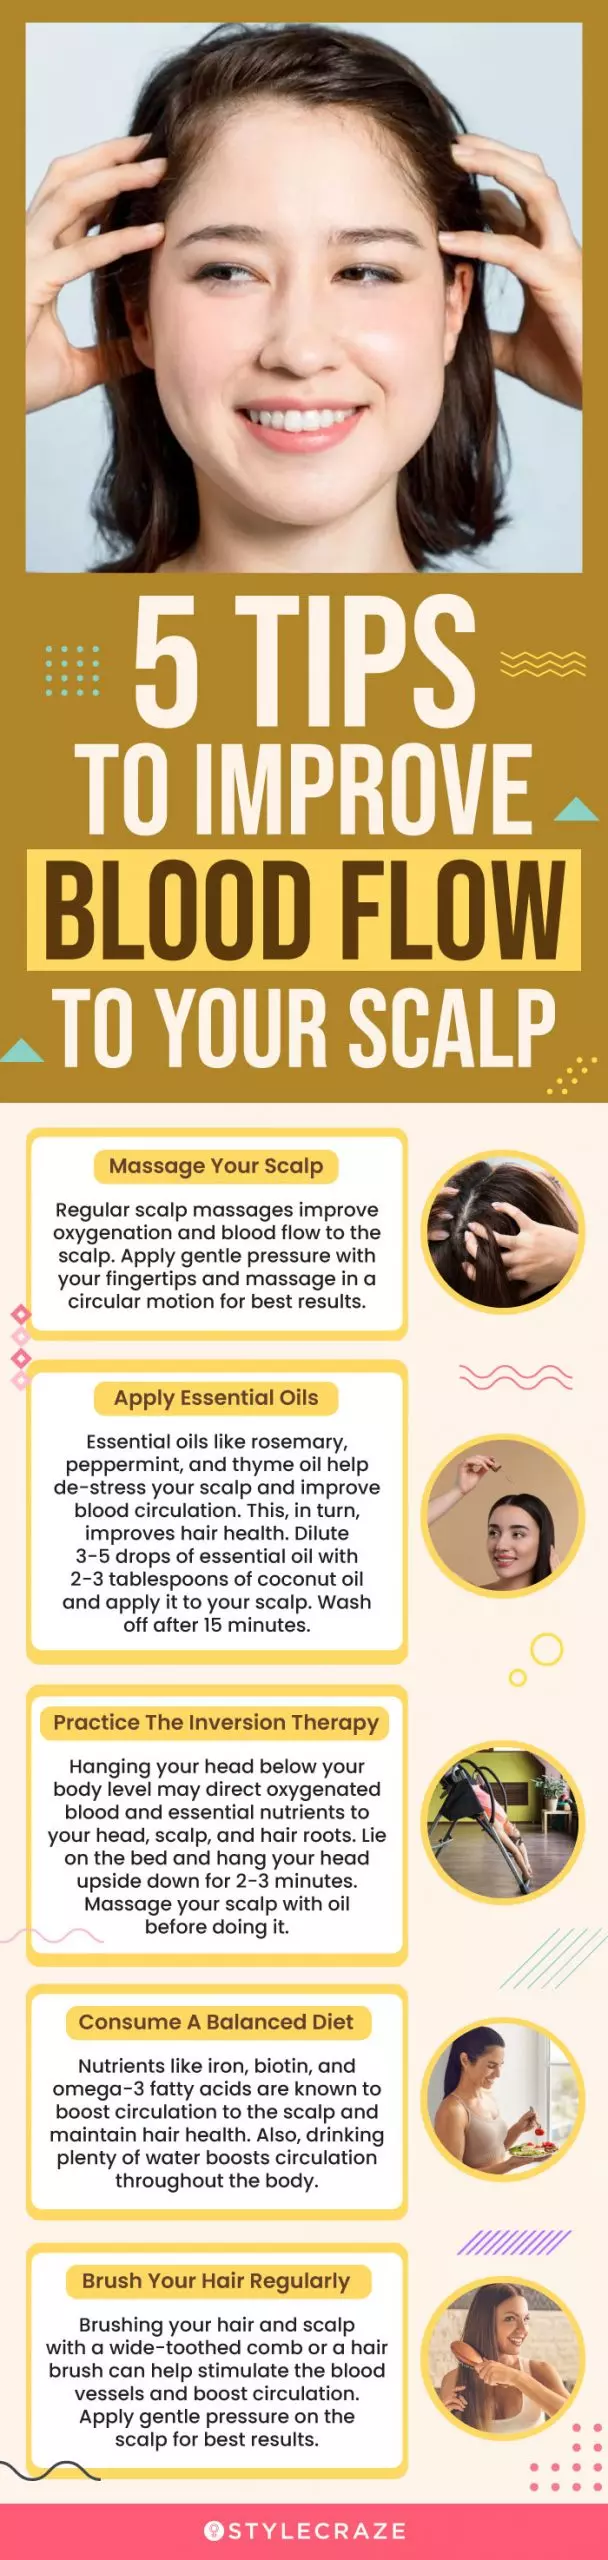 5 tips to improve blood flow to your scalp (infographic)